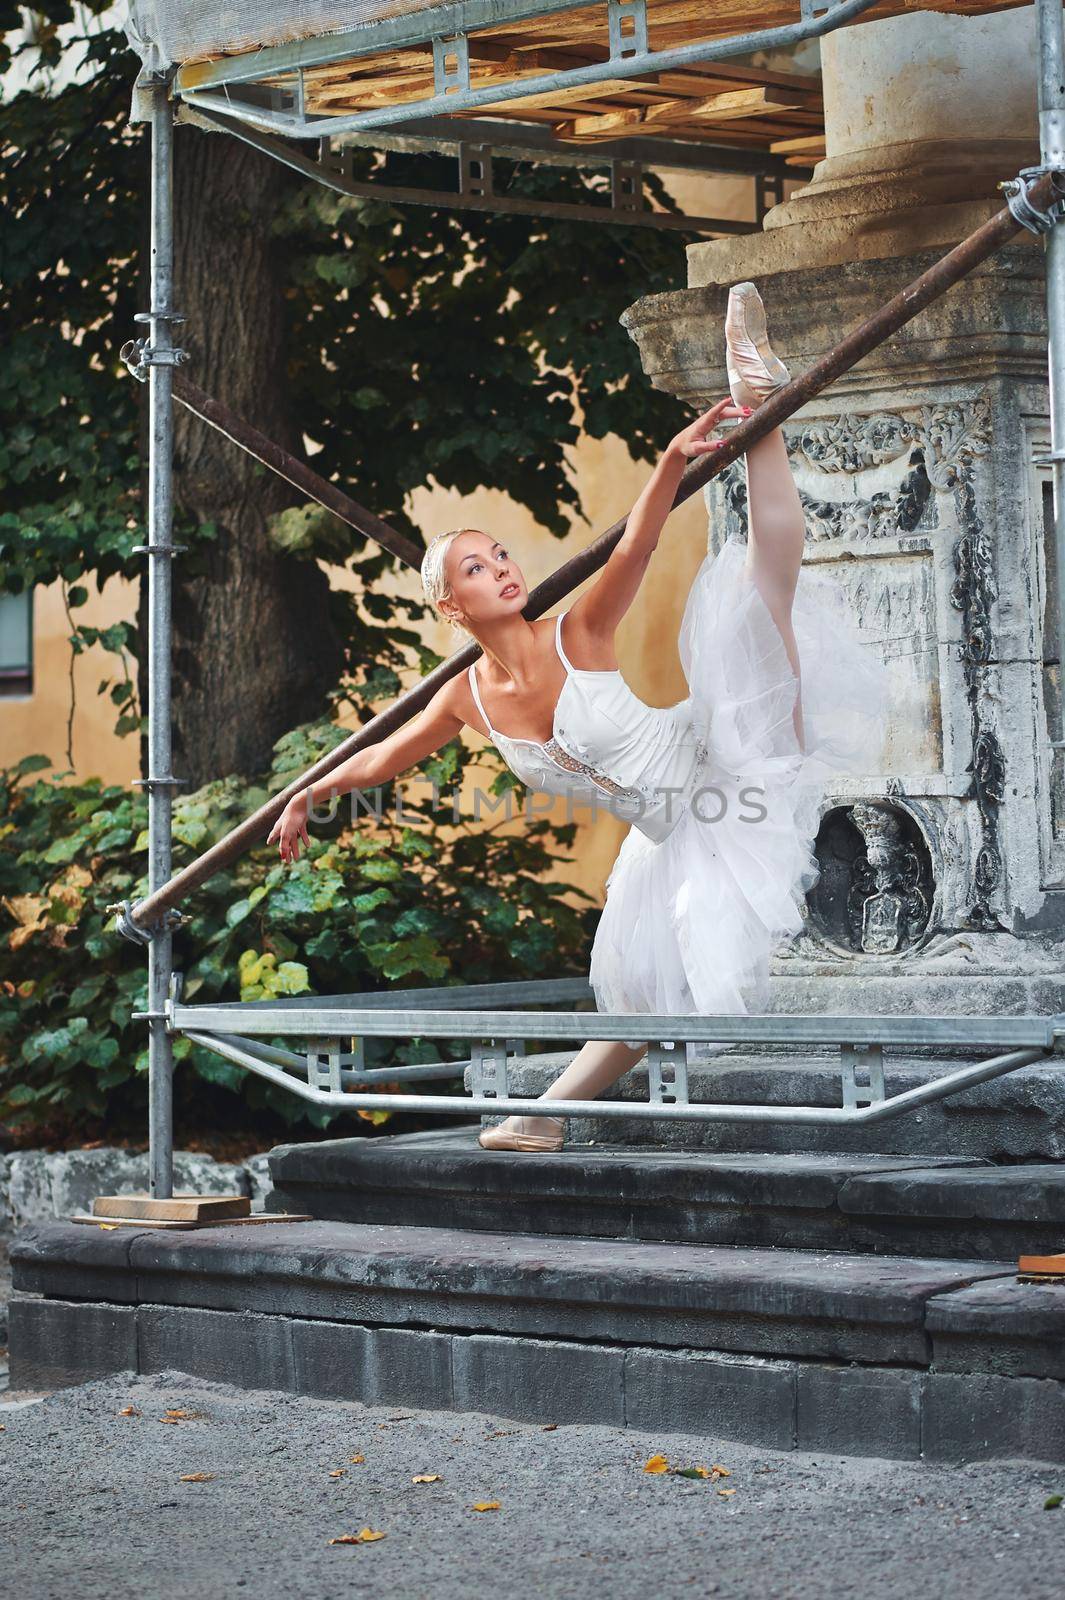 Vertical shot of a gorgeous ballerina in white outfit performing near an old building under construction.